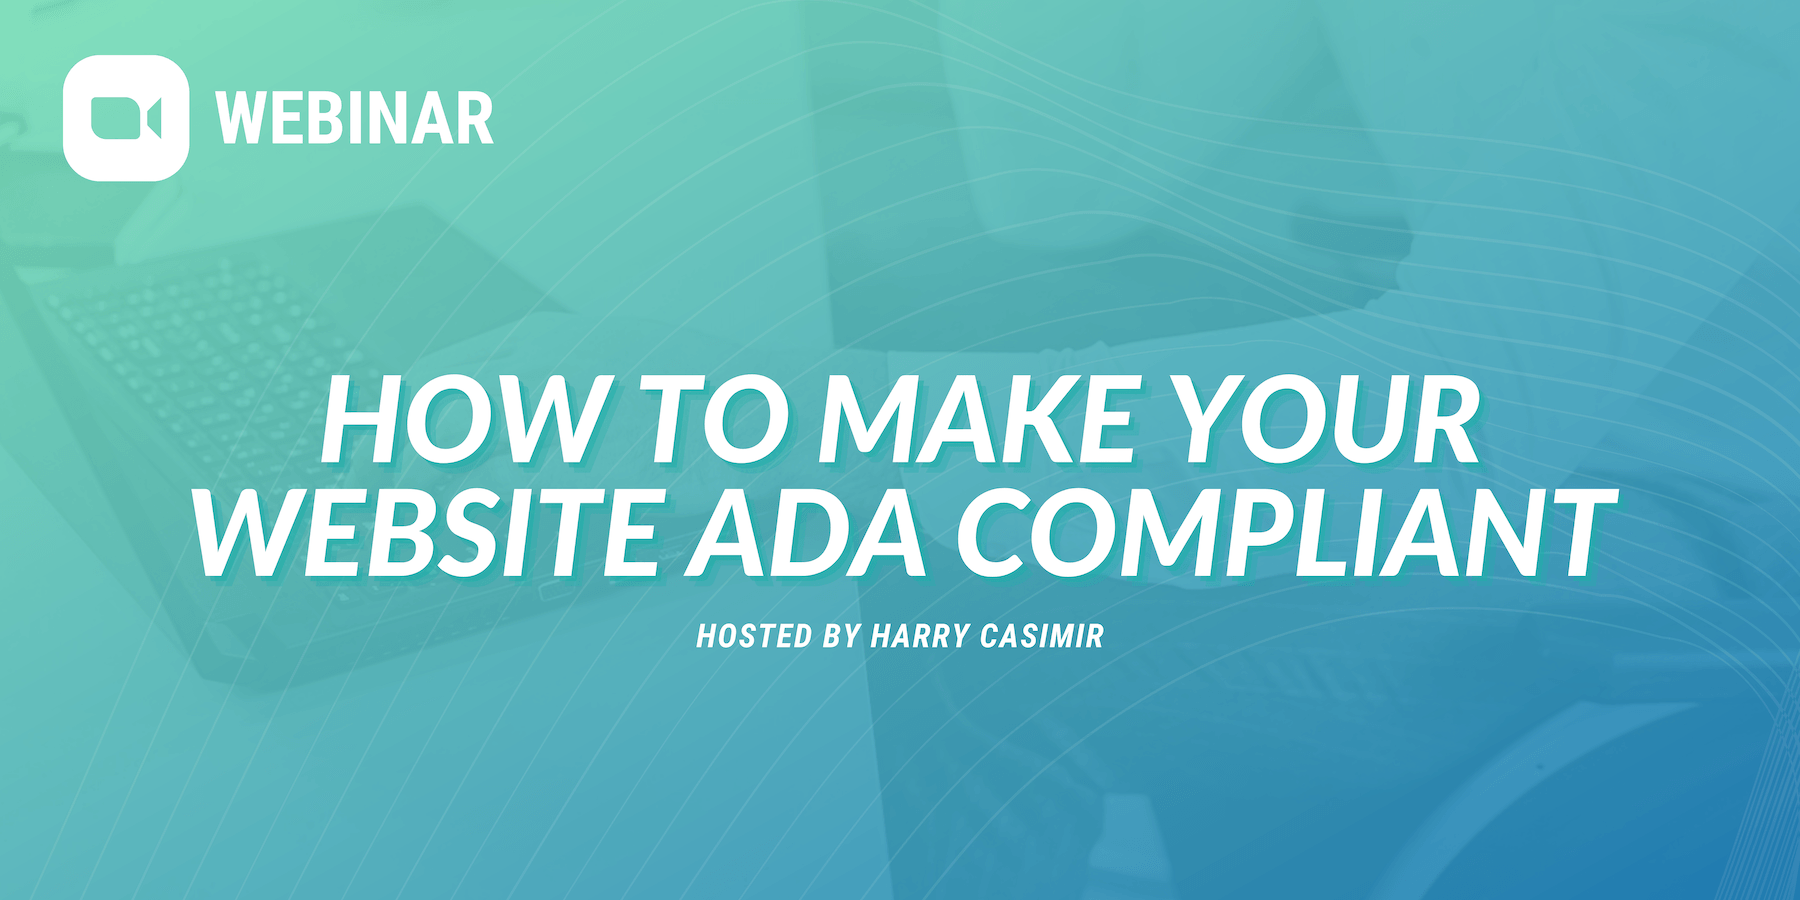 Webinar: How to make your website ADA compliant, hosted by Harry Casimir